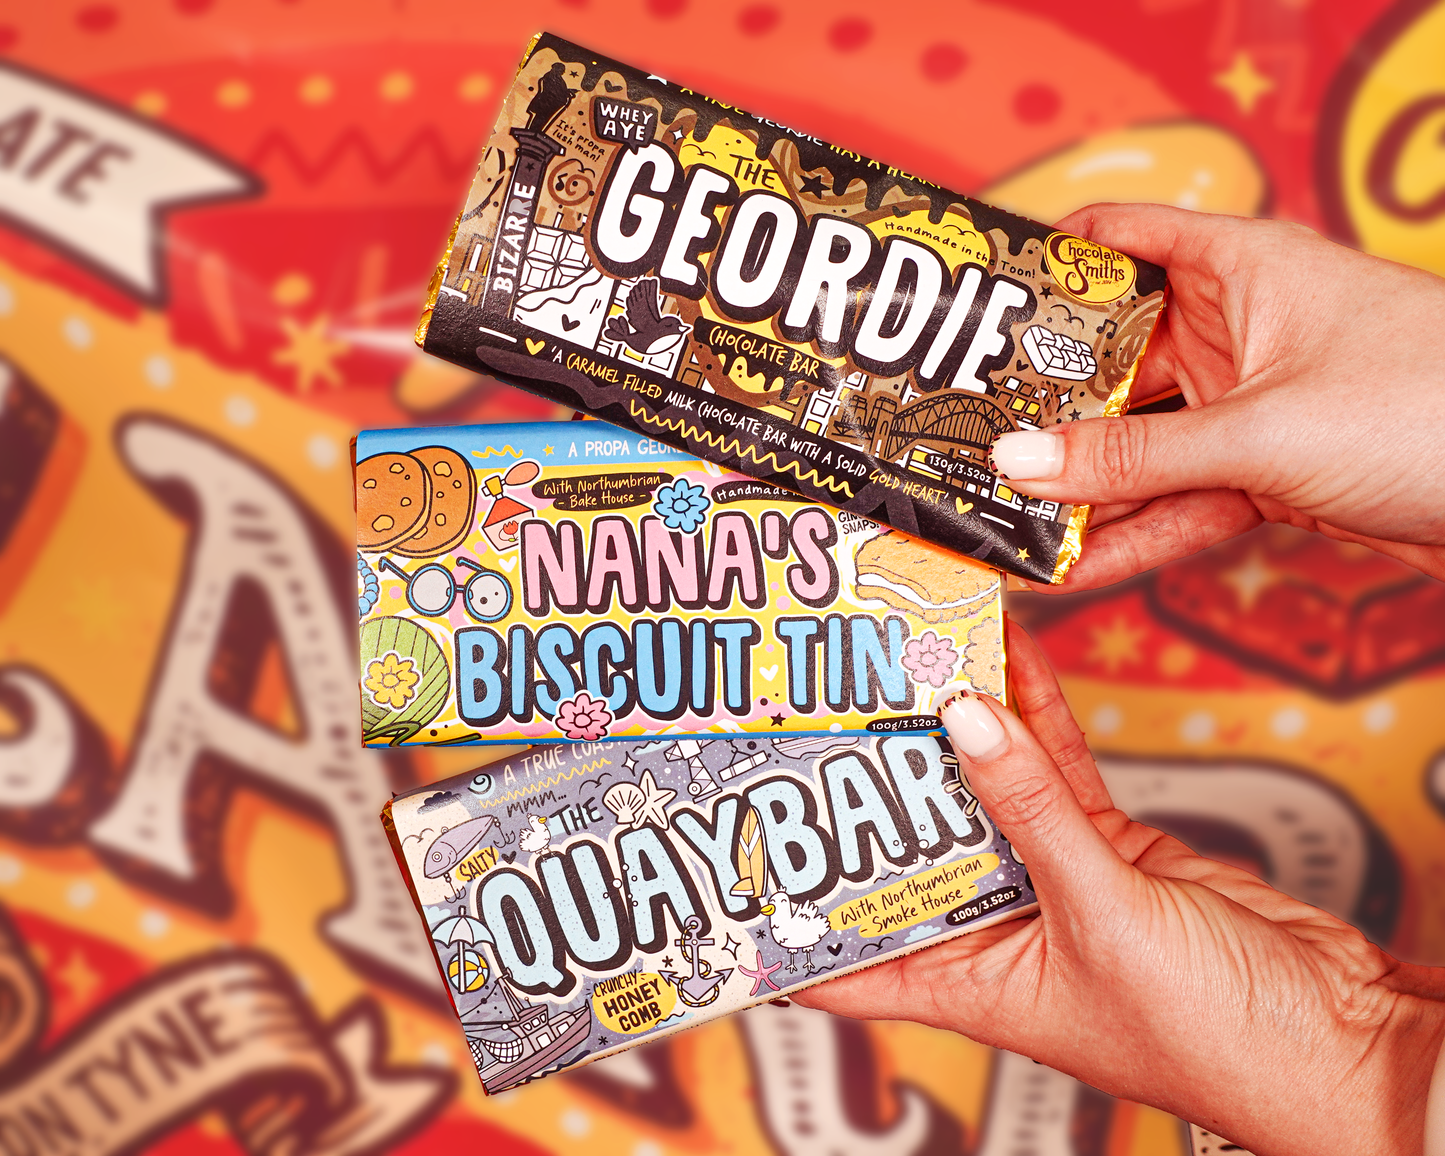 The Geordie Trio - The Geordie Bar, Nana's Biscuit Tin & The Quay Bar